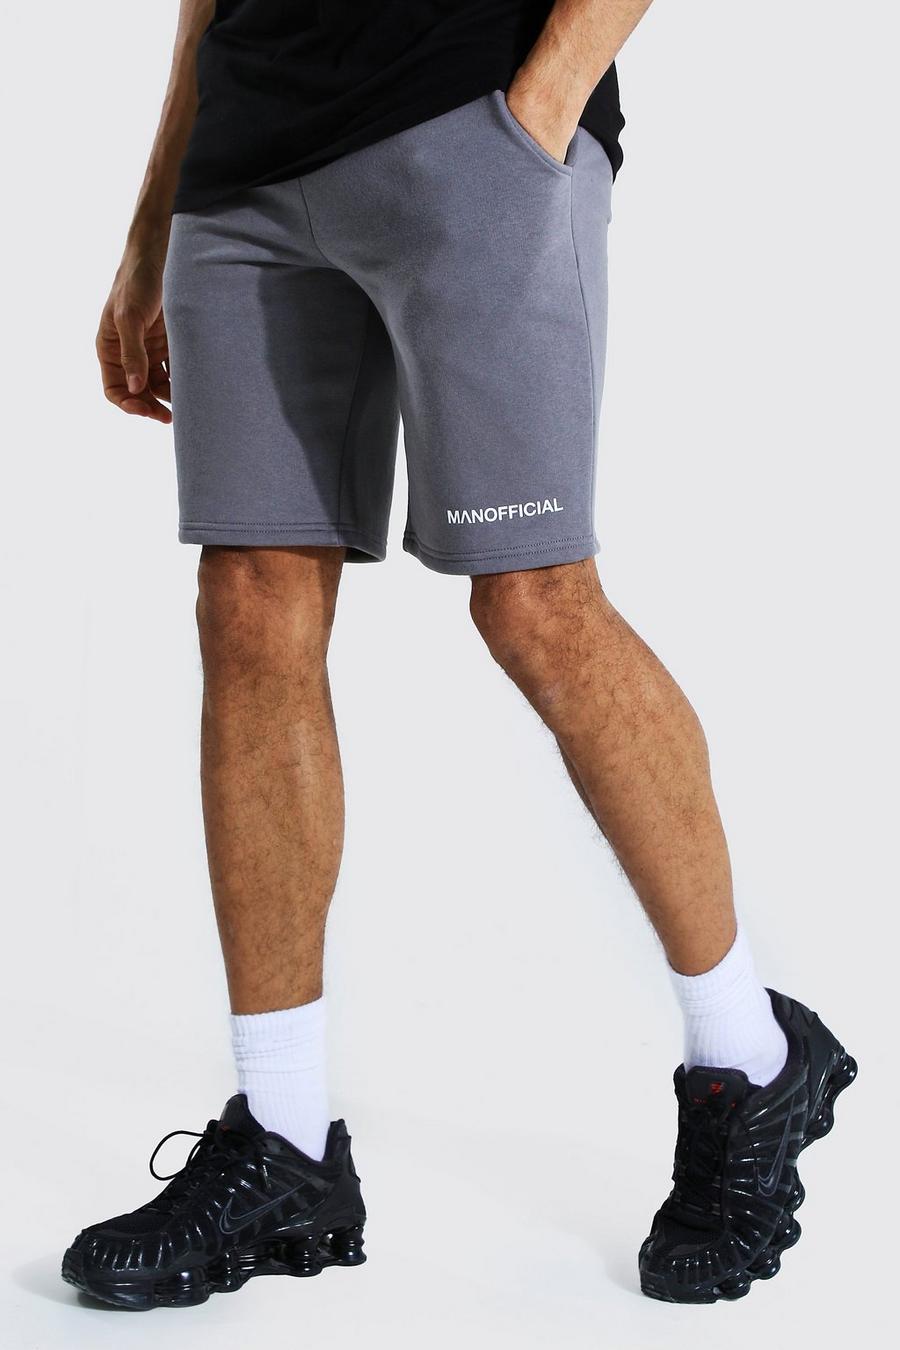 Charcoal grey Tall Middellange Jersey Man Official Shorts Met Taille Band Detail image number 1